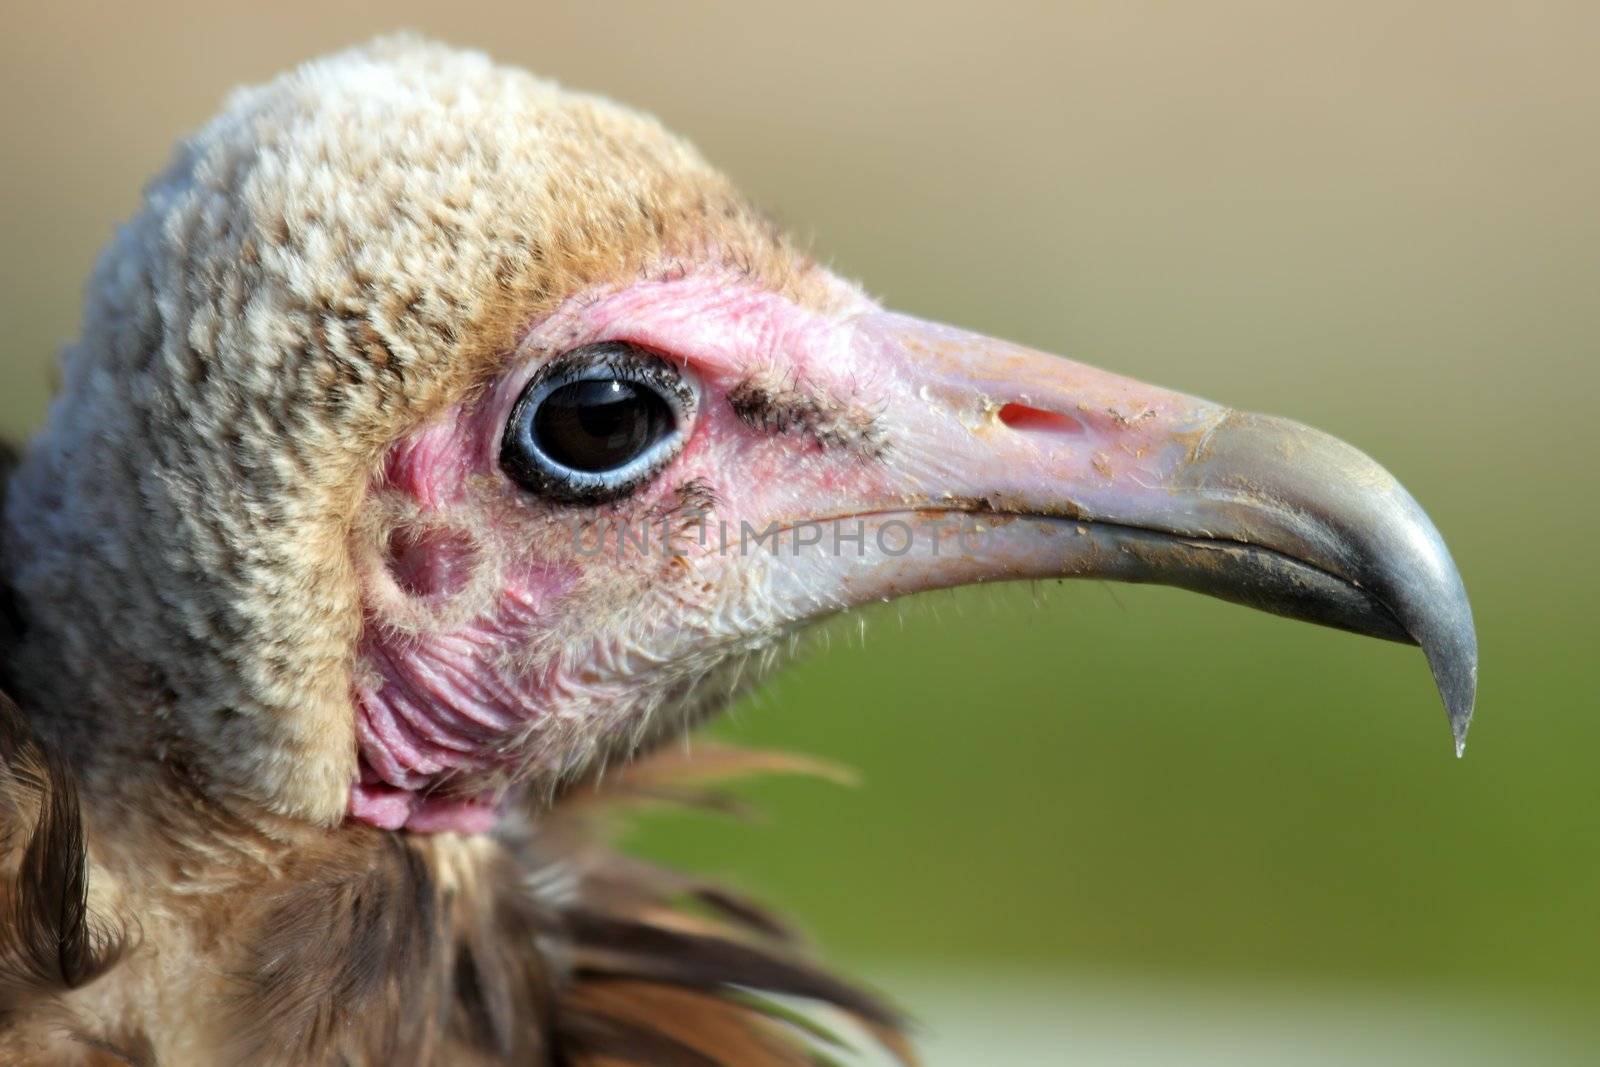 a portrait of an ugly vulture